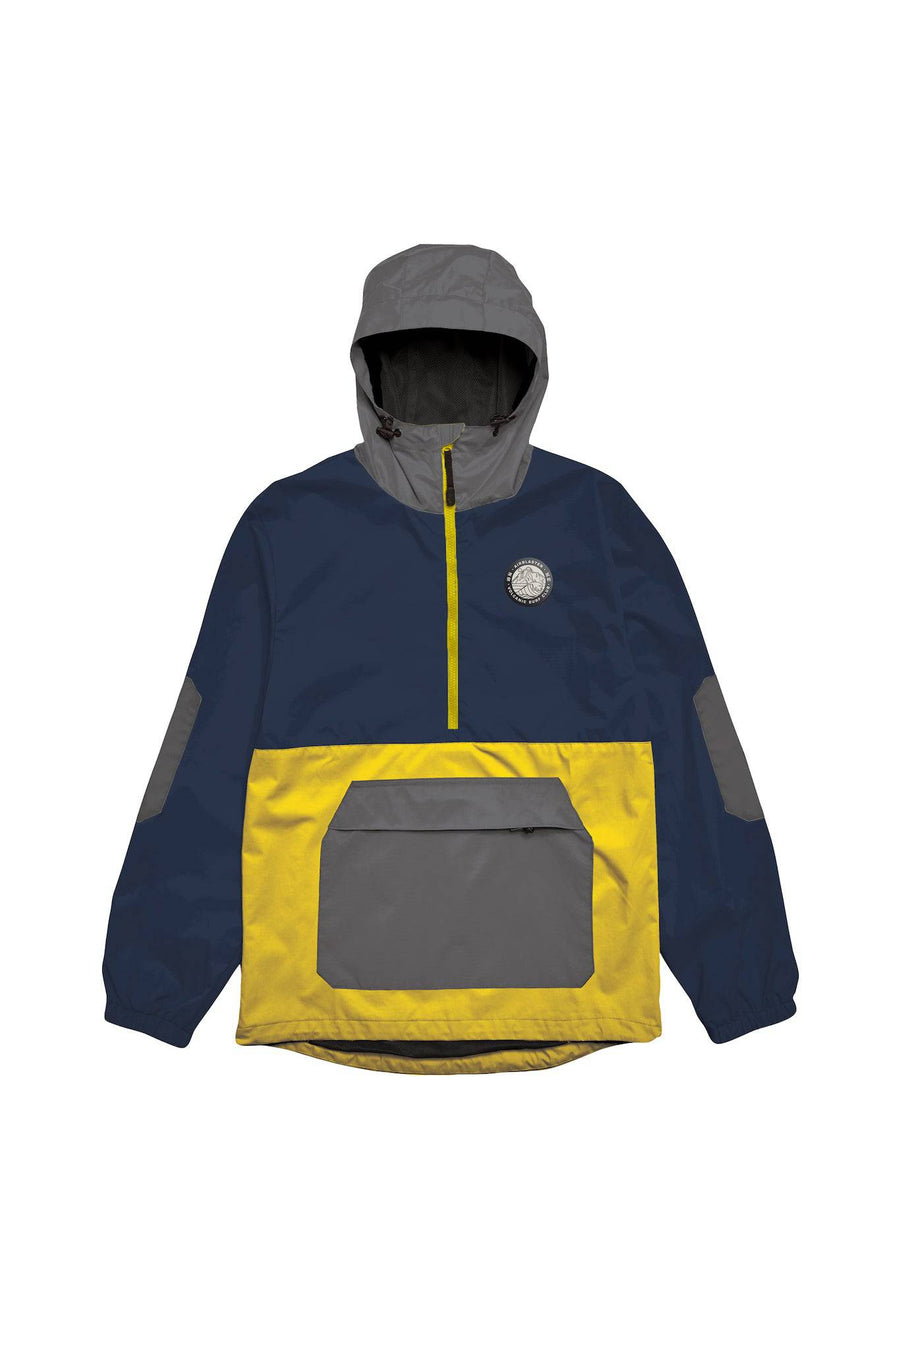 Airblaster Breakwinder Packable Pullover Jacket in Navy and Yolo 2023